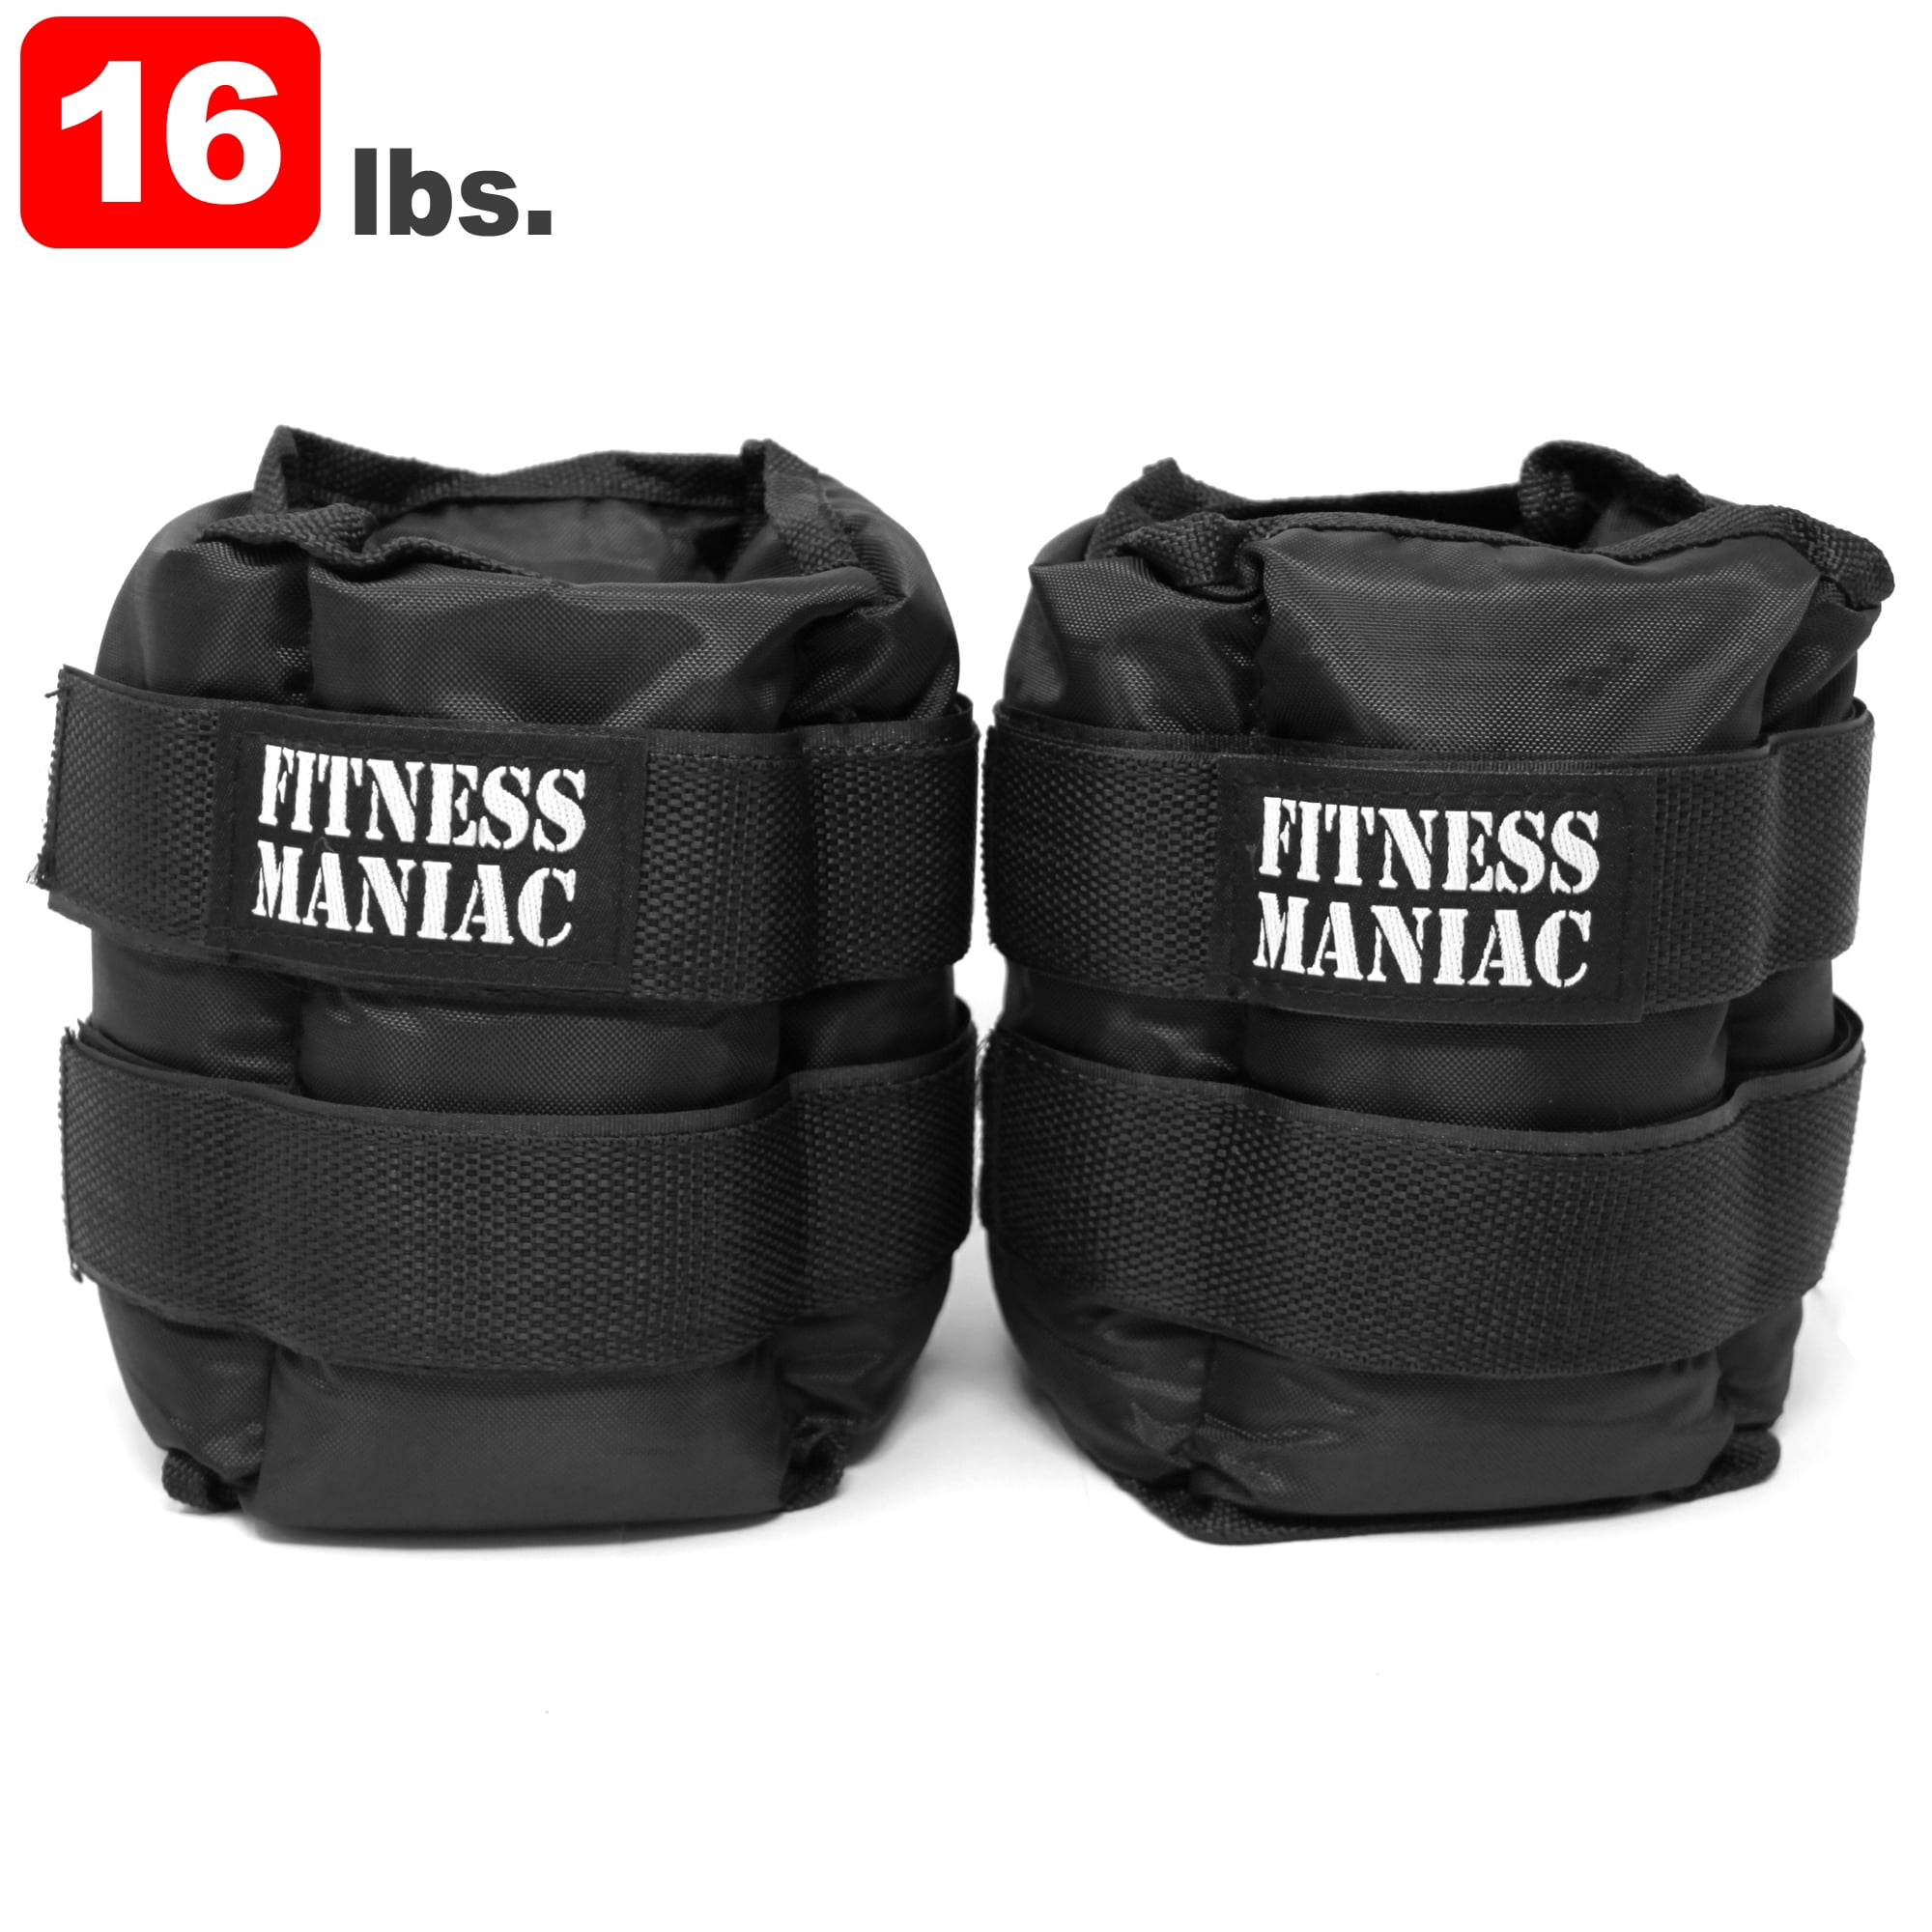 10 lb Adjustable Ankle Weights Pair Fitness Exercise Strength Endurance Training 